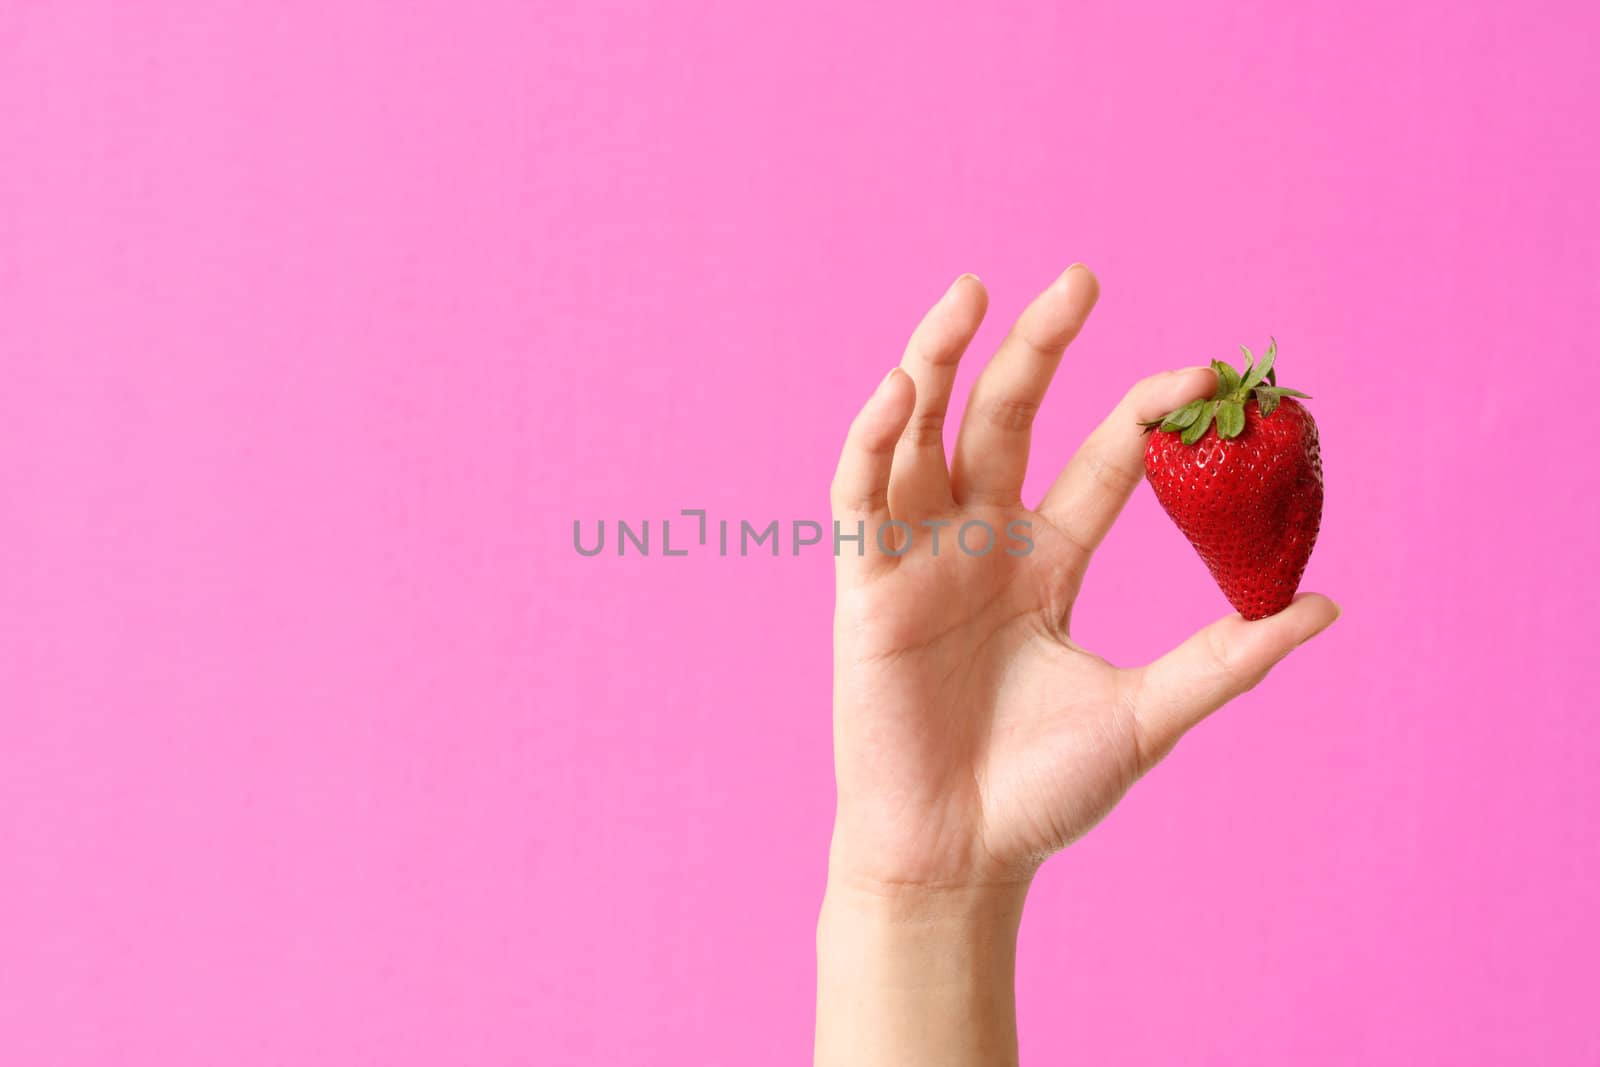 Strawberry and woman by aremafoto